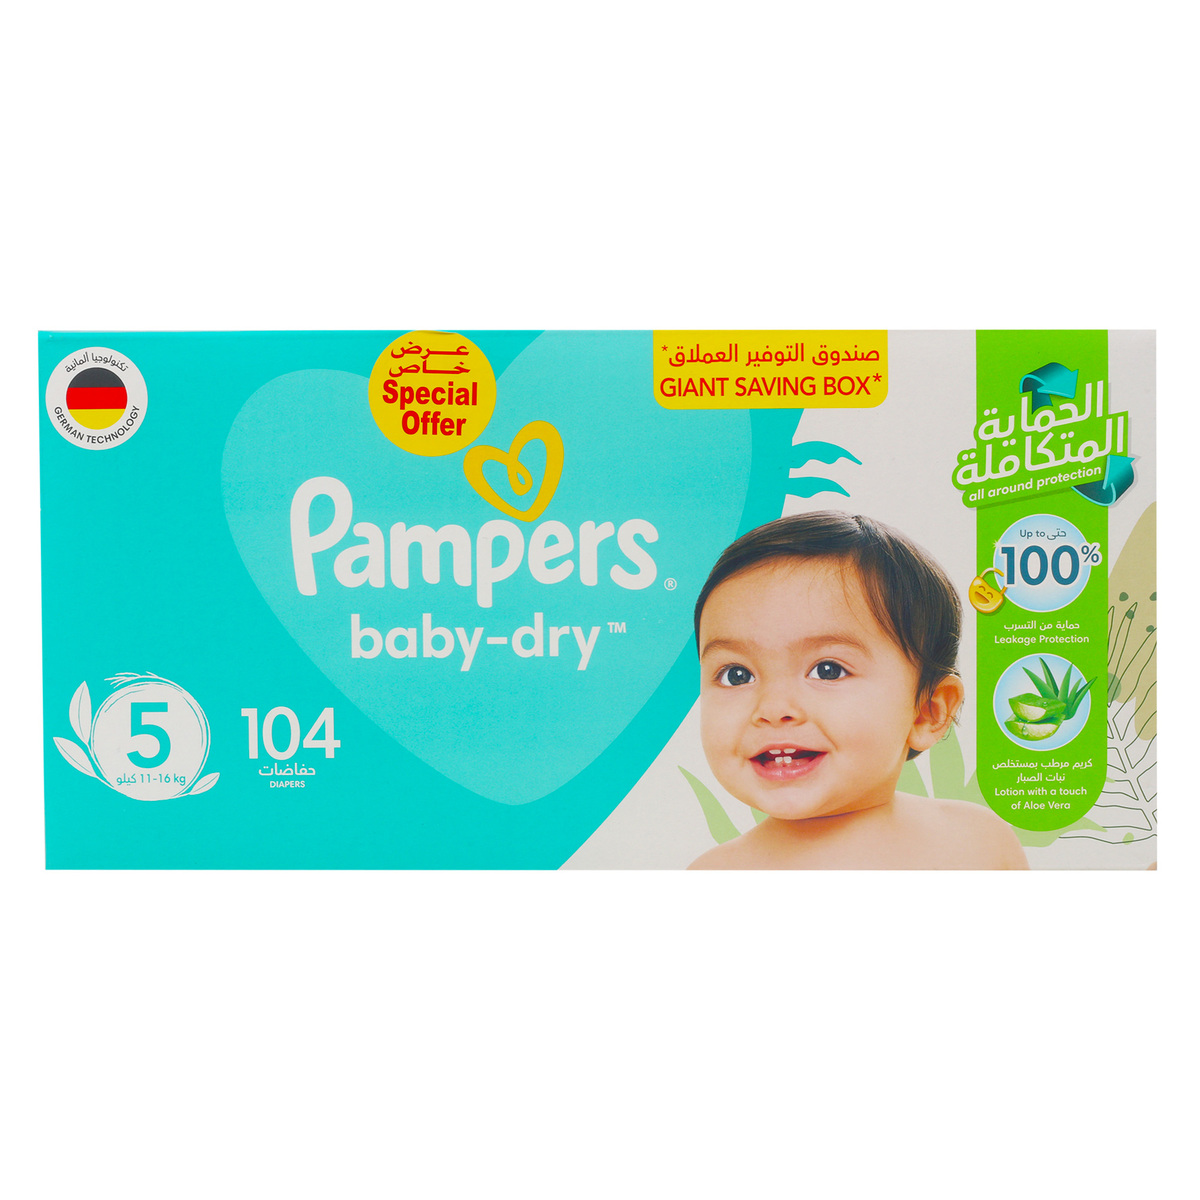 Pampers Baby-Dry Diaper Size 5 11-16 kg Mega Box Value Pack 104 pcs Online  at Best Price, Baby Nappies, Lulu Kuwait price in Kuwait, LuLu Kuwait